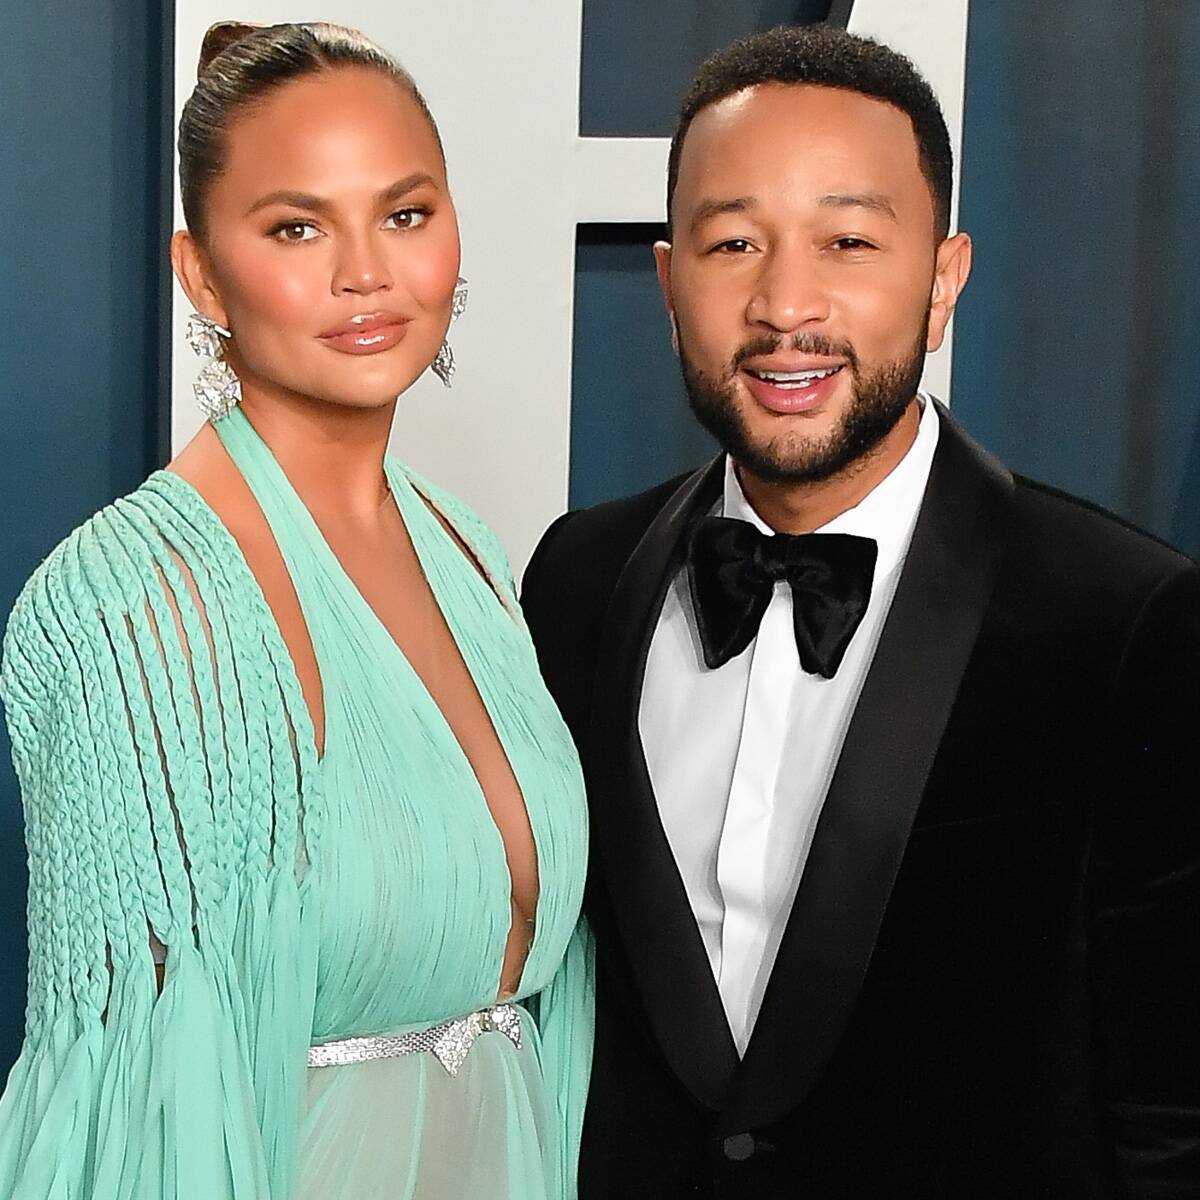 John Legend Shares Update on Chrissy Teigen Amid Bullying Controversy